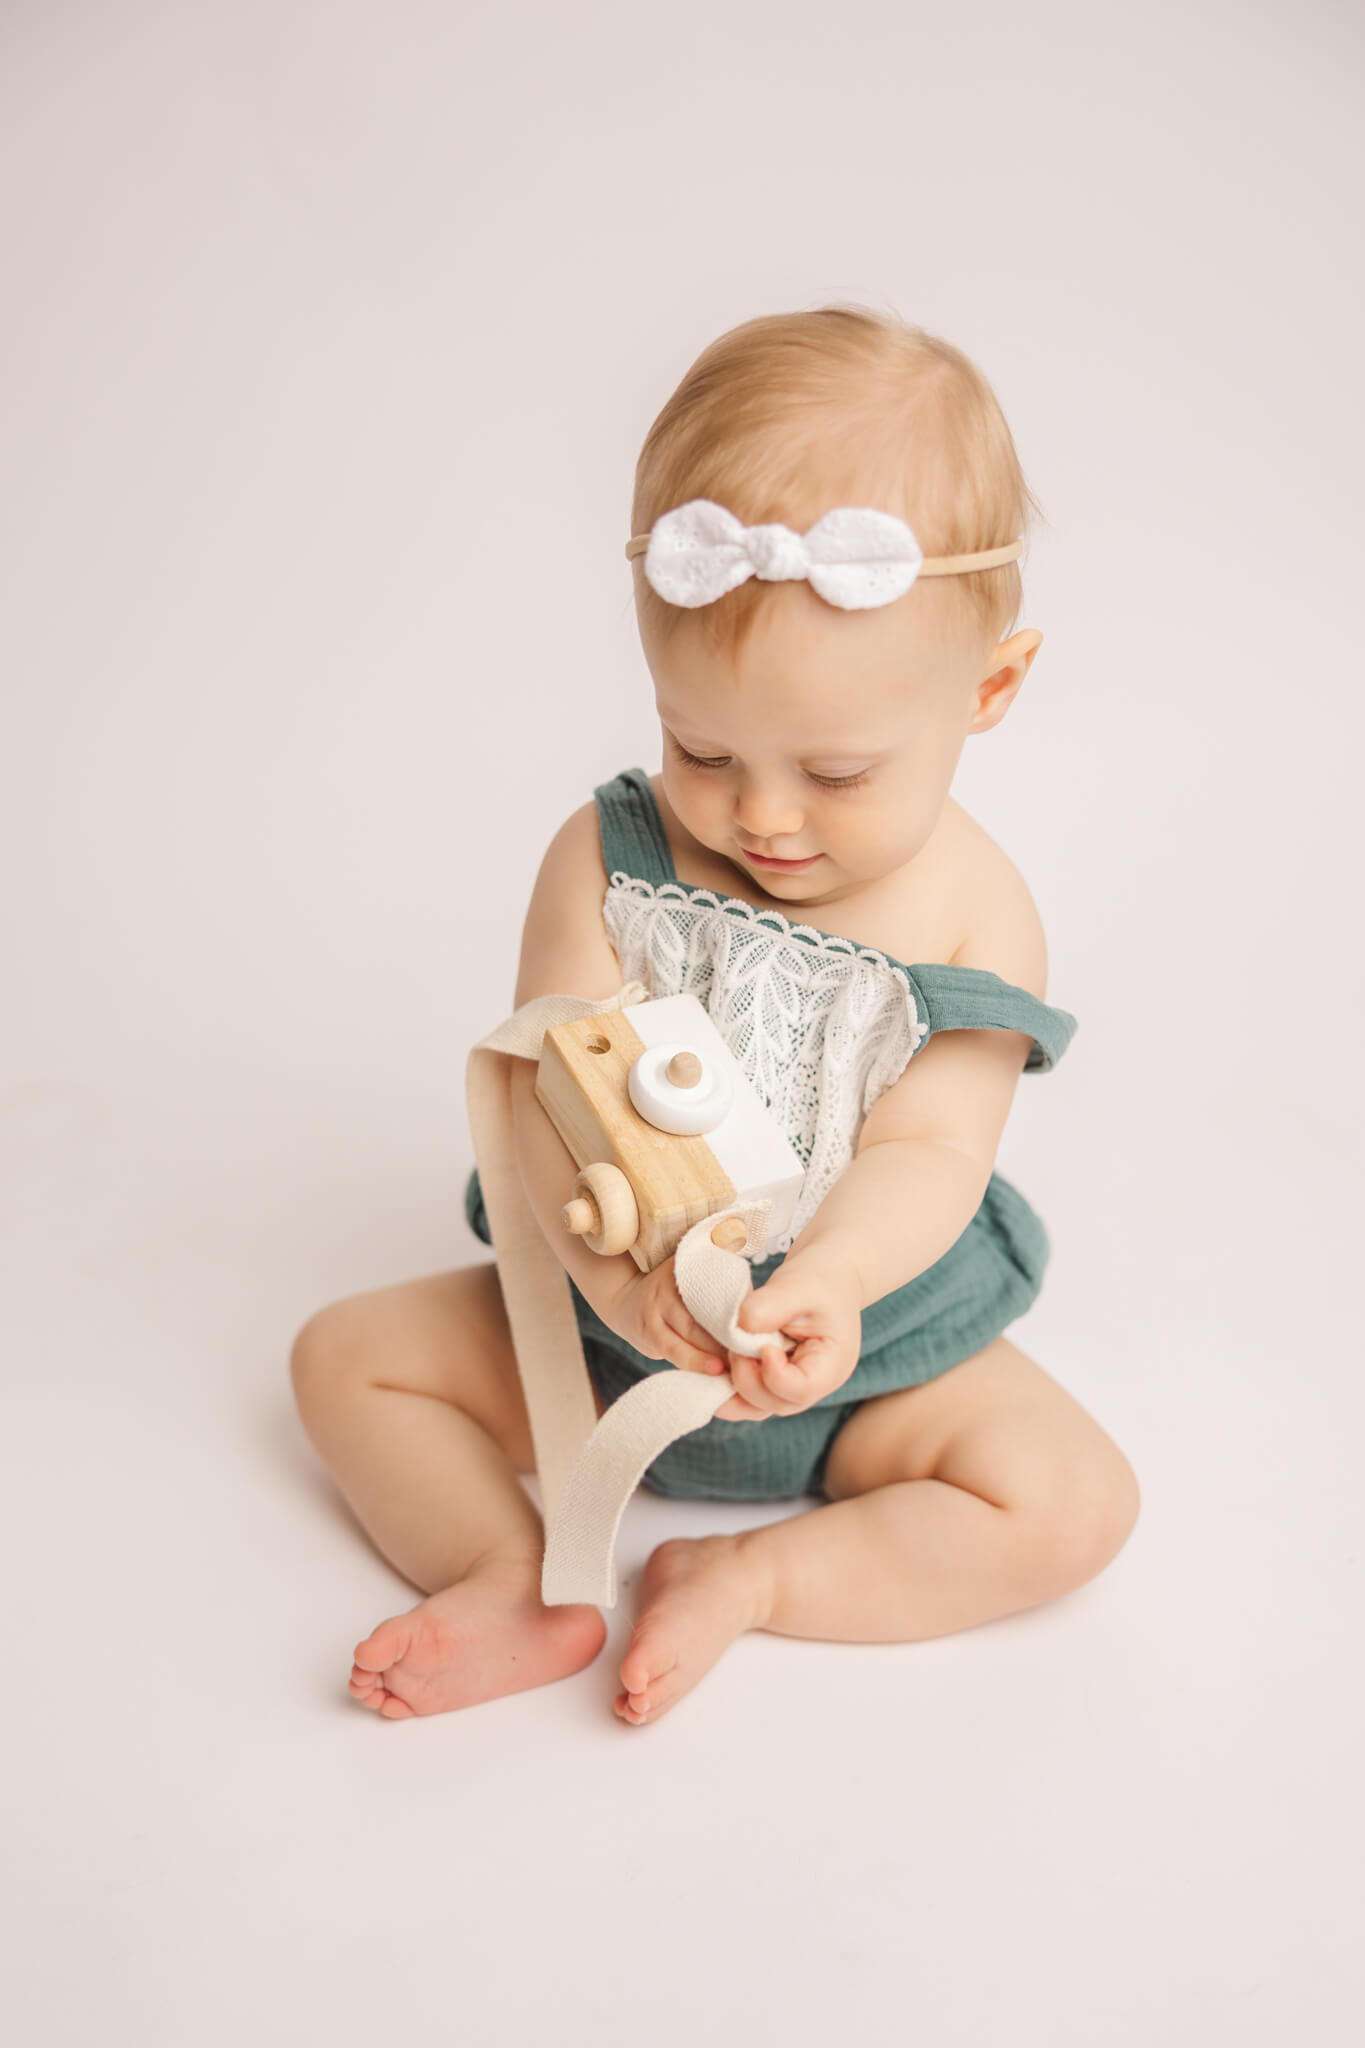 One year old sweet girl playing with a wooden camera during her cake smash session